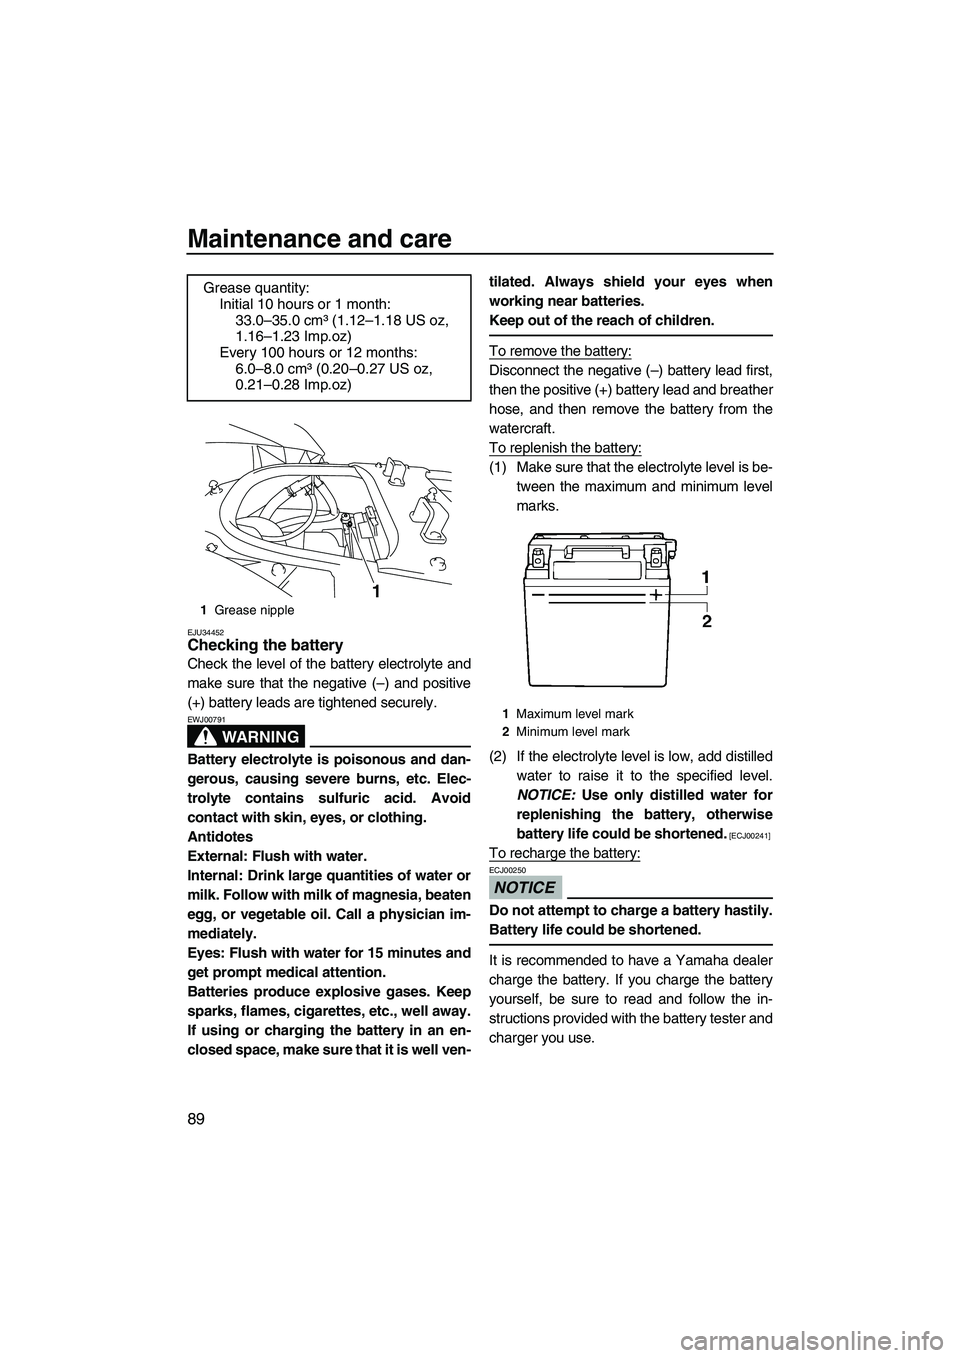 YAMAHA SVHO 2009  Owners Manual Maintenance and care
89
EJU34452Checking the battery 
Check the level of the battery electrolyte and
make sure that the negative (–) and positive
(+) battery leads are tightened securely.
WARNING
EW